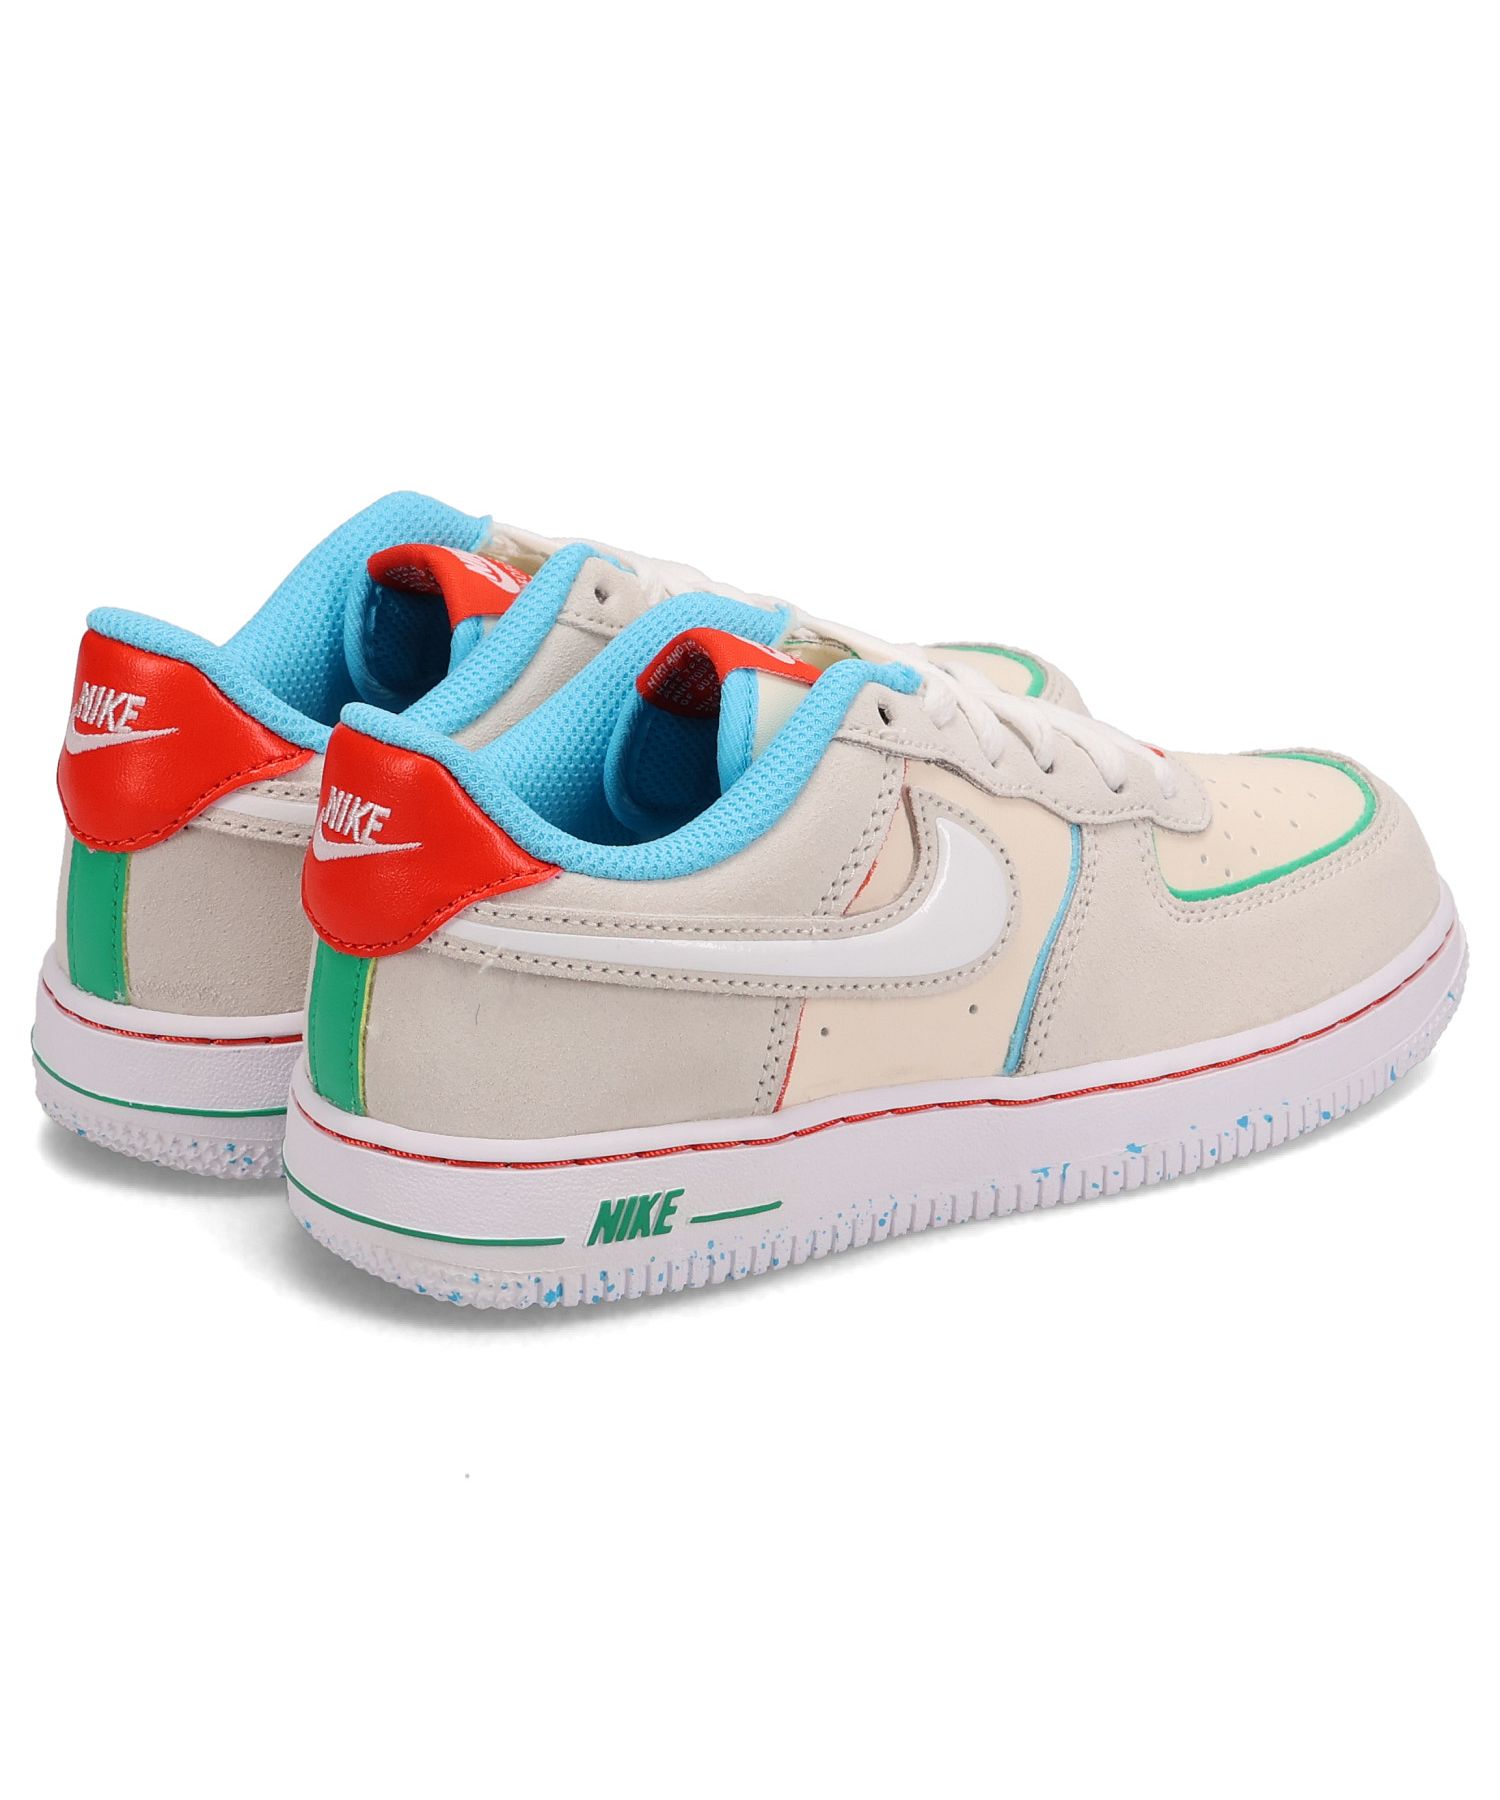 NIKE FORCE 1 LV8 PS ナイキ フォース1 LV8 スニーカー キッズ 